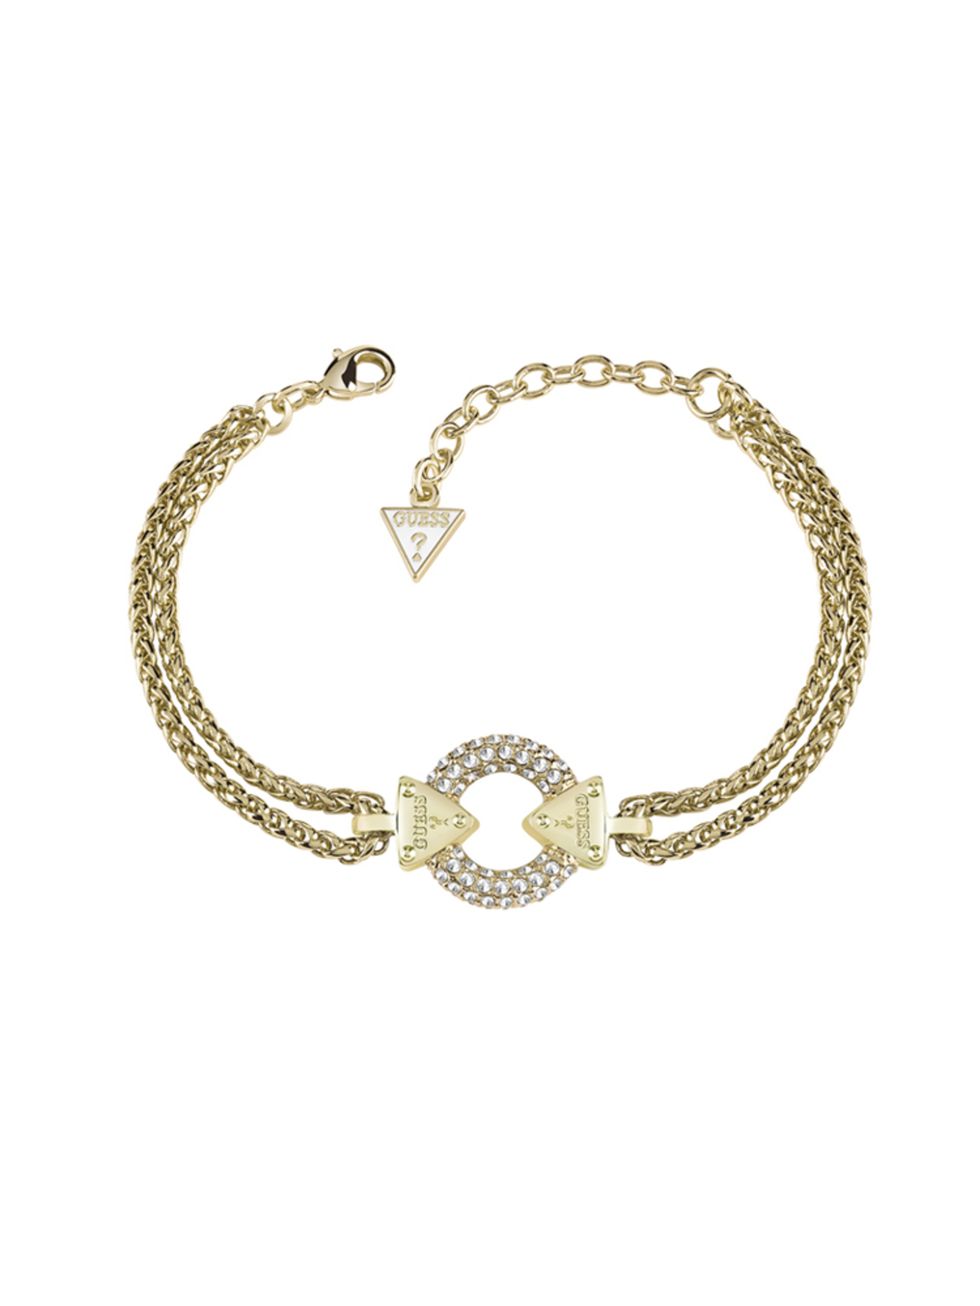 <p><a href="http://www.hsamuel.co.uk/webstore/d/3765342/guess+yellow+gold+plated+chain+circle+lock+bracelet/" target="_blank">Embrace Me</a> Gold Plated Bracelet, £95</p>